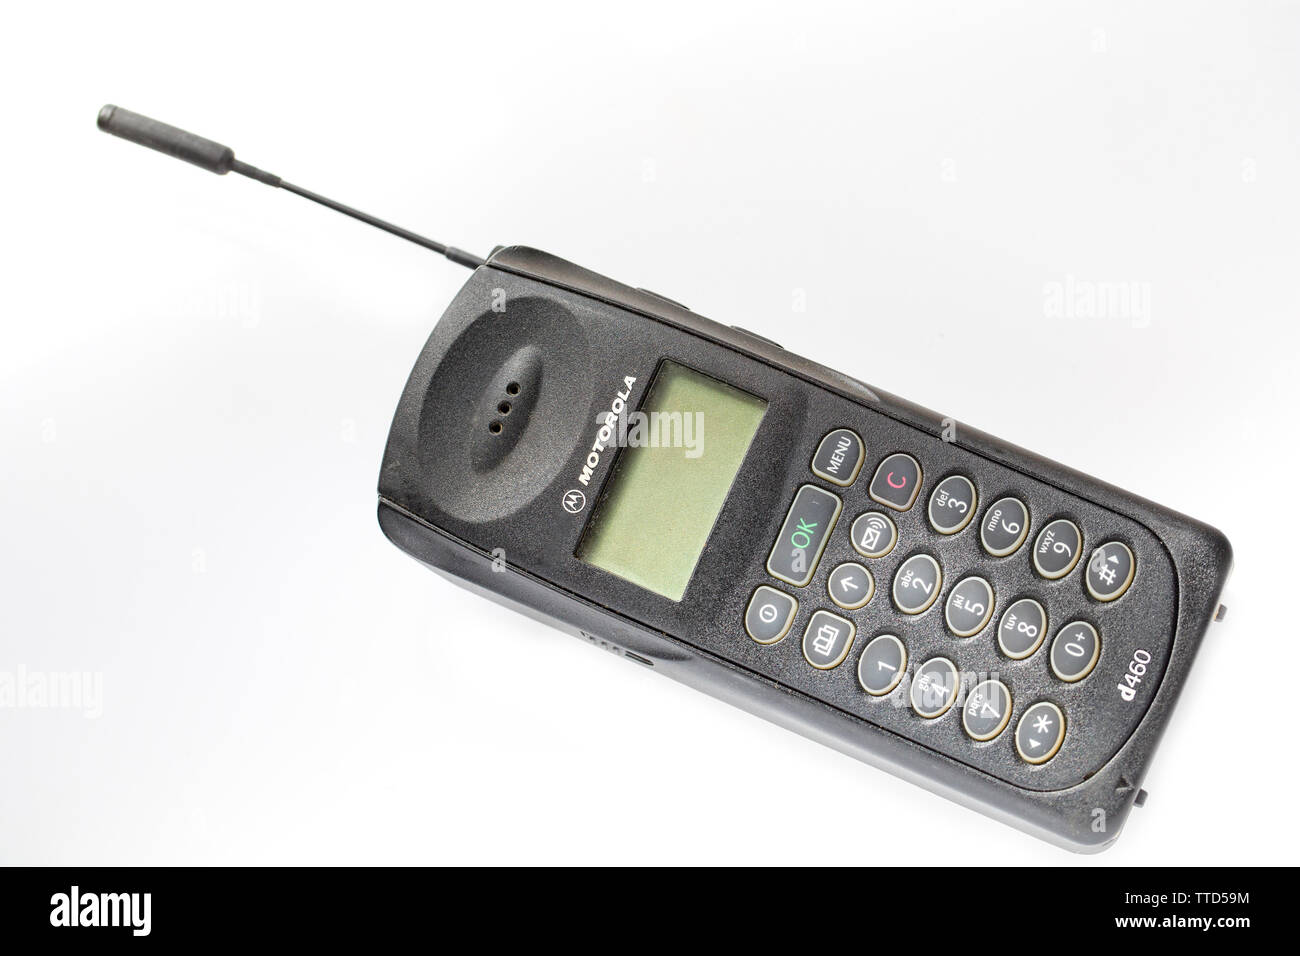 A Motorola d460 from around 1996/1997 with its aerial extended. Photographed on a white background. England UK GB Stock Photo